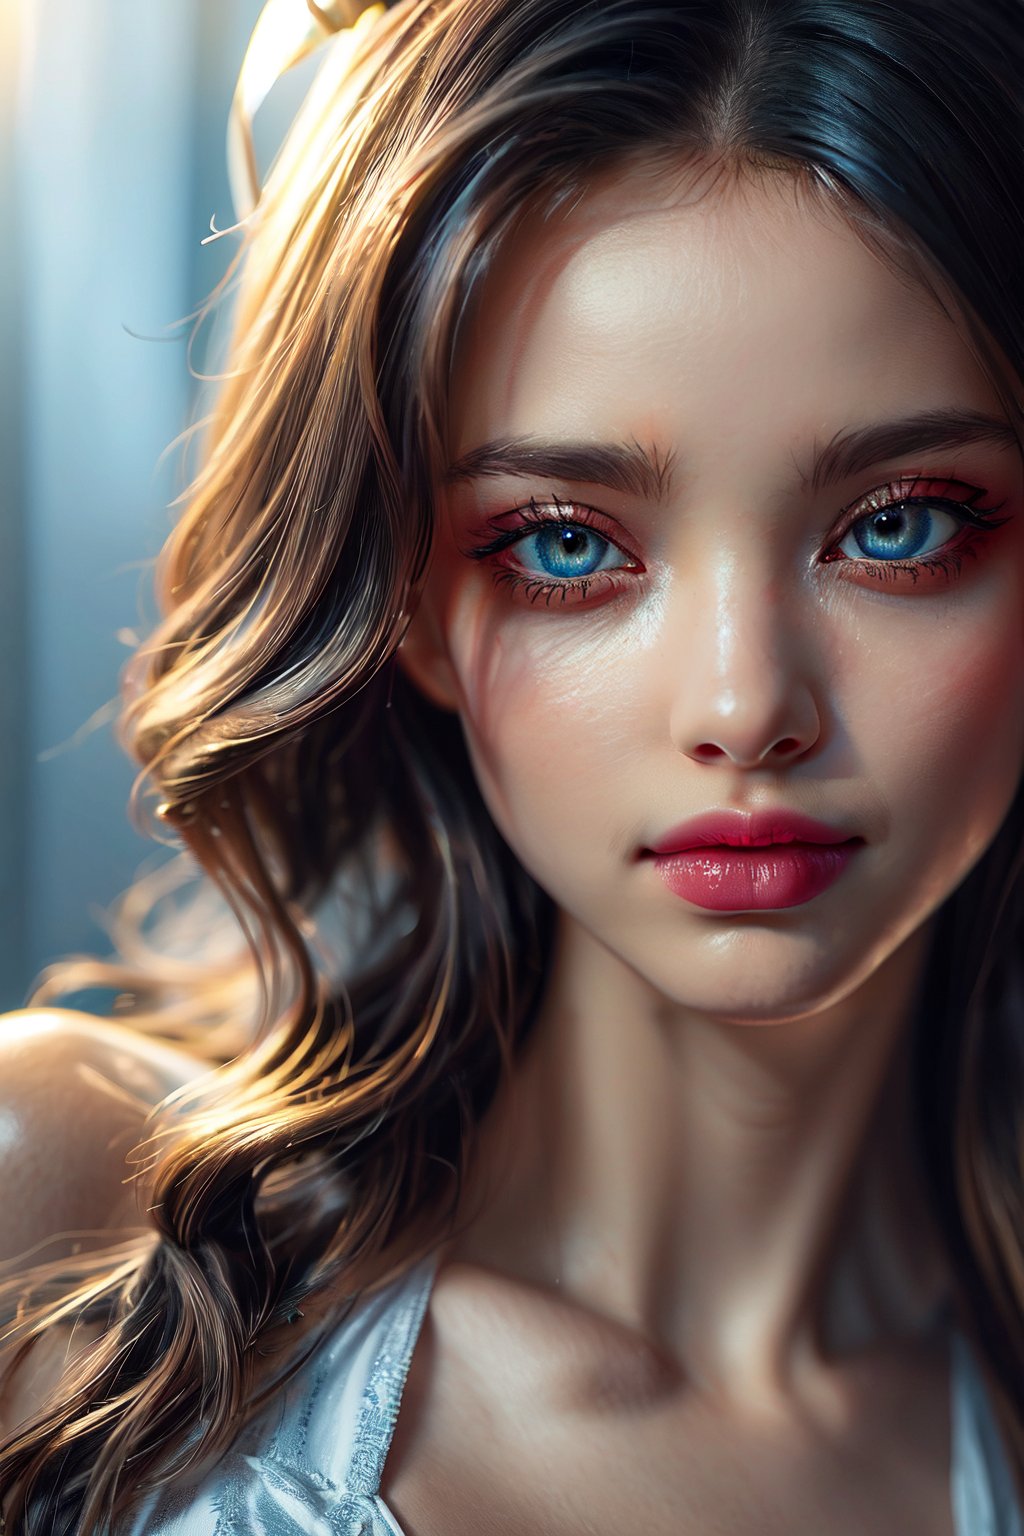 (masterpiece, high quality:1.5), 8K, HDR, 
1girl, well_defined_face, well_defined_eyes, ultra_detailed_eyes, ultra_detailed_face, by FuturEvoLab, 
ethereal lighting, immortal, elegant, porcelain skin, jet-black hair, waves, pale face, ice-blue eyes, blood-red lips, pinhole photograph, retro aesthetic, monochromatic backdrop, mysterious, enigmatic, timeless allure, the siren of the night, secrets, longing, hidden dangers, captivating, nostalgia, timeless fascination, smile, 